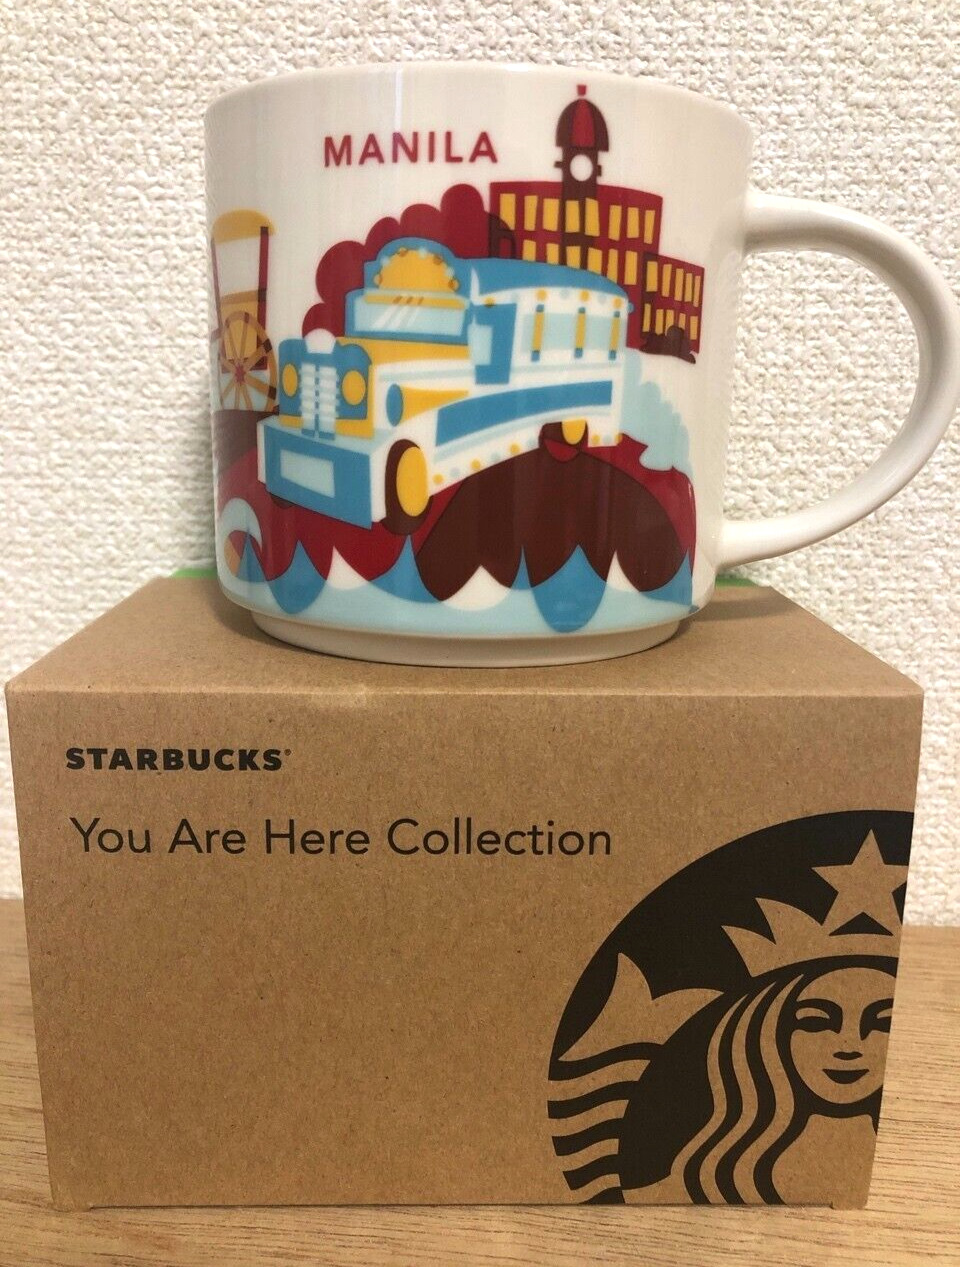 MANILA Starbucks coffee Cup Mug 14oz You Are Here Collection YAH NEW With Box